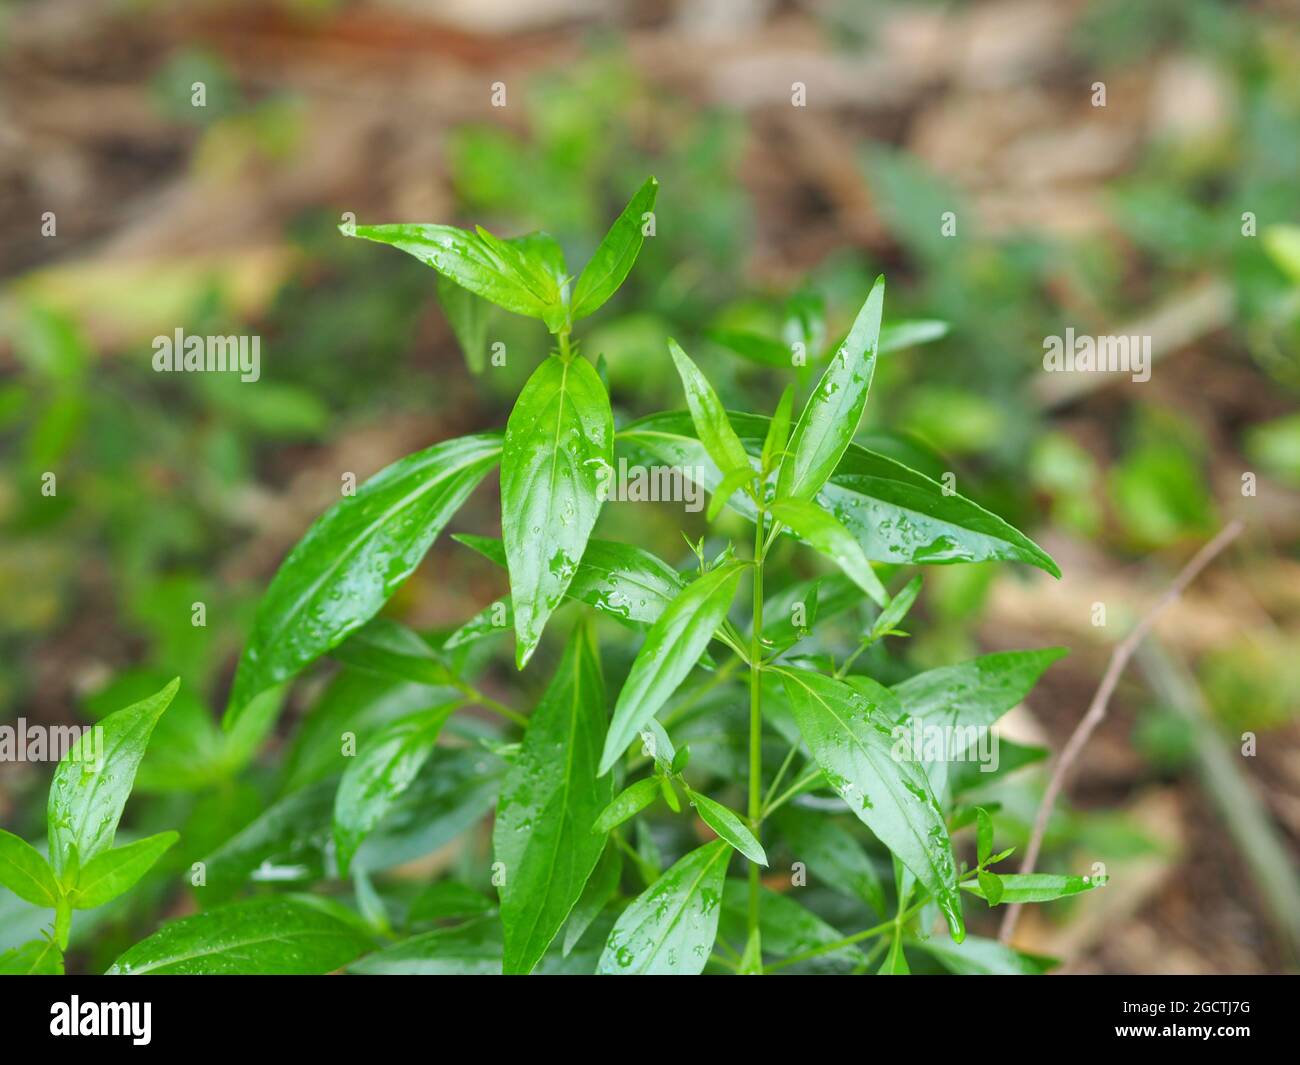 King of bitters scientific name Andrographis paniculata Burm, Wall. Ex Nees, Fah Talai jhon, Thai herbs relieve sore throat, reduce fever, heat up the Stock Photo